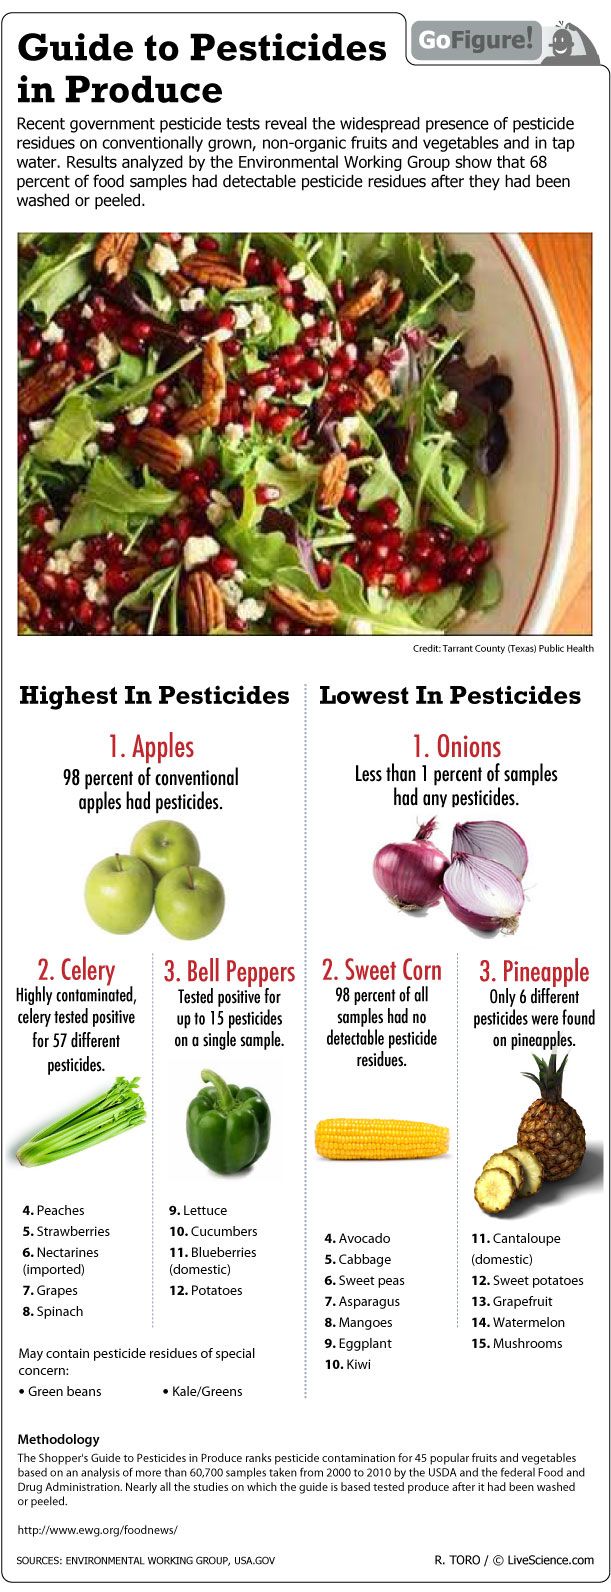 Five Reasons to Eat Organic Apples: Pesticides, Healthy